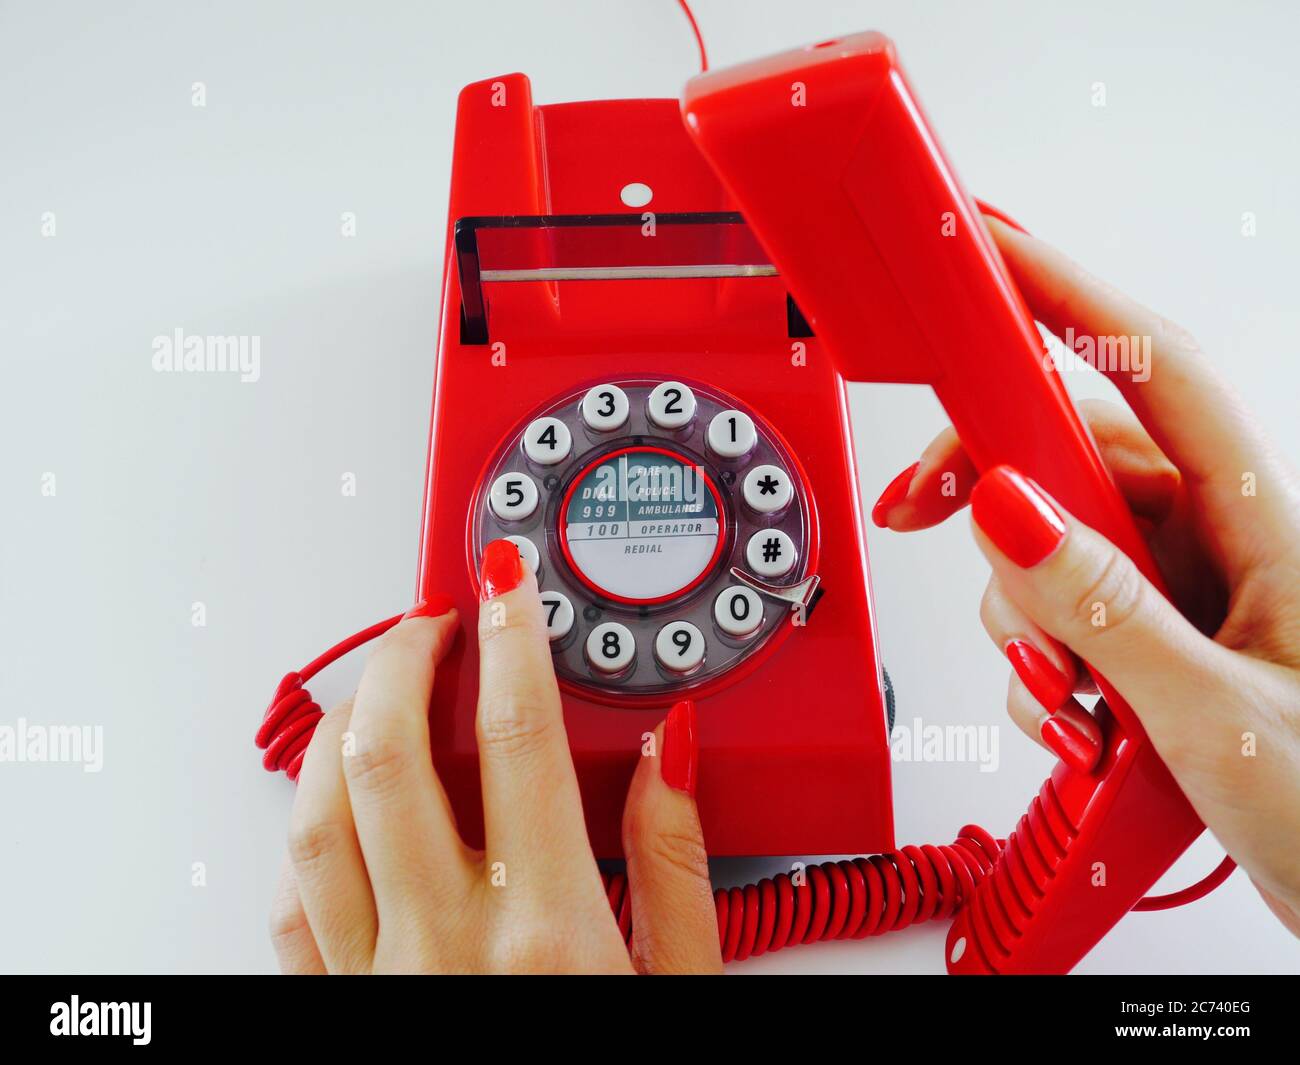 Female hands with red manicured nails make a telephone call, dialling the number 6 Stock Photo